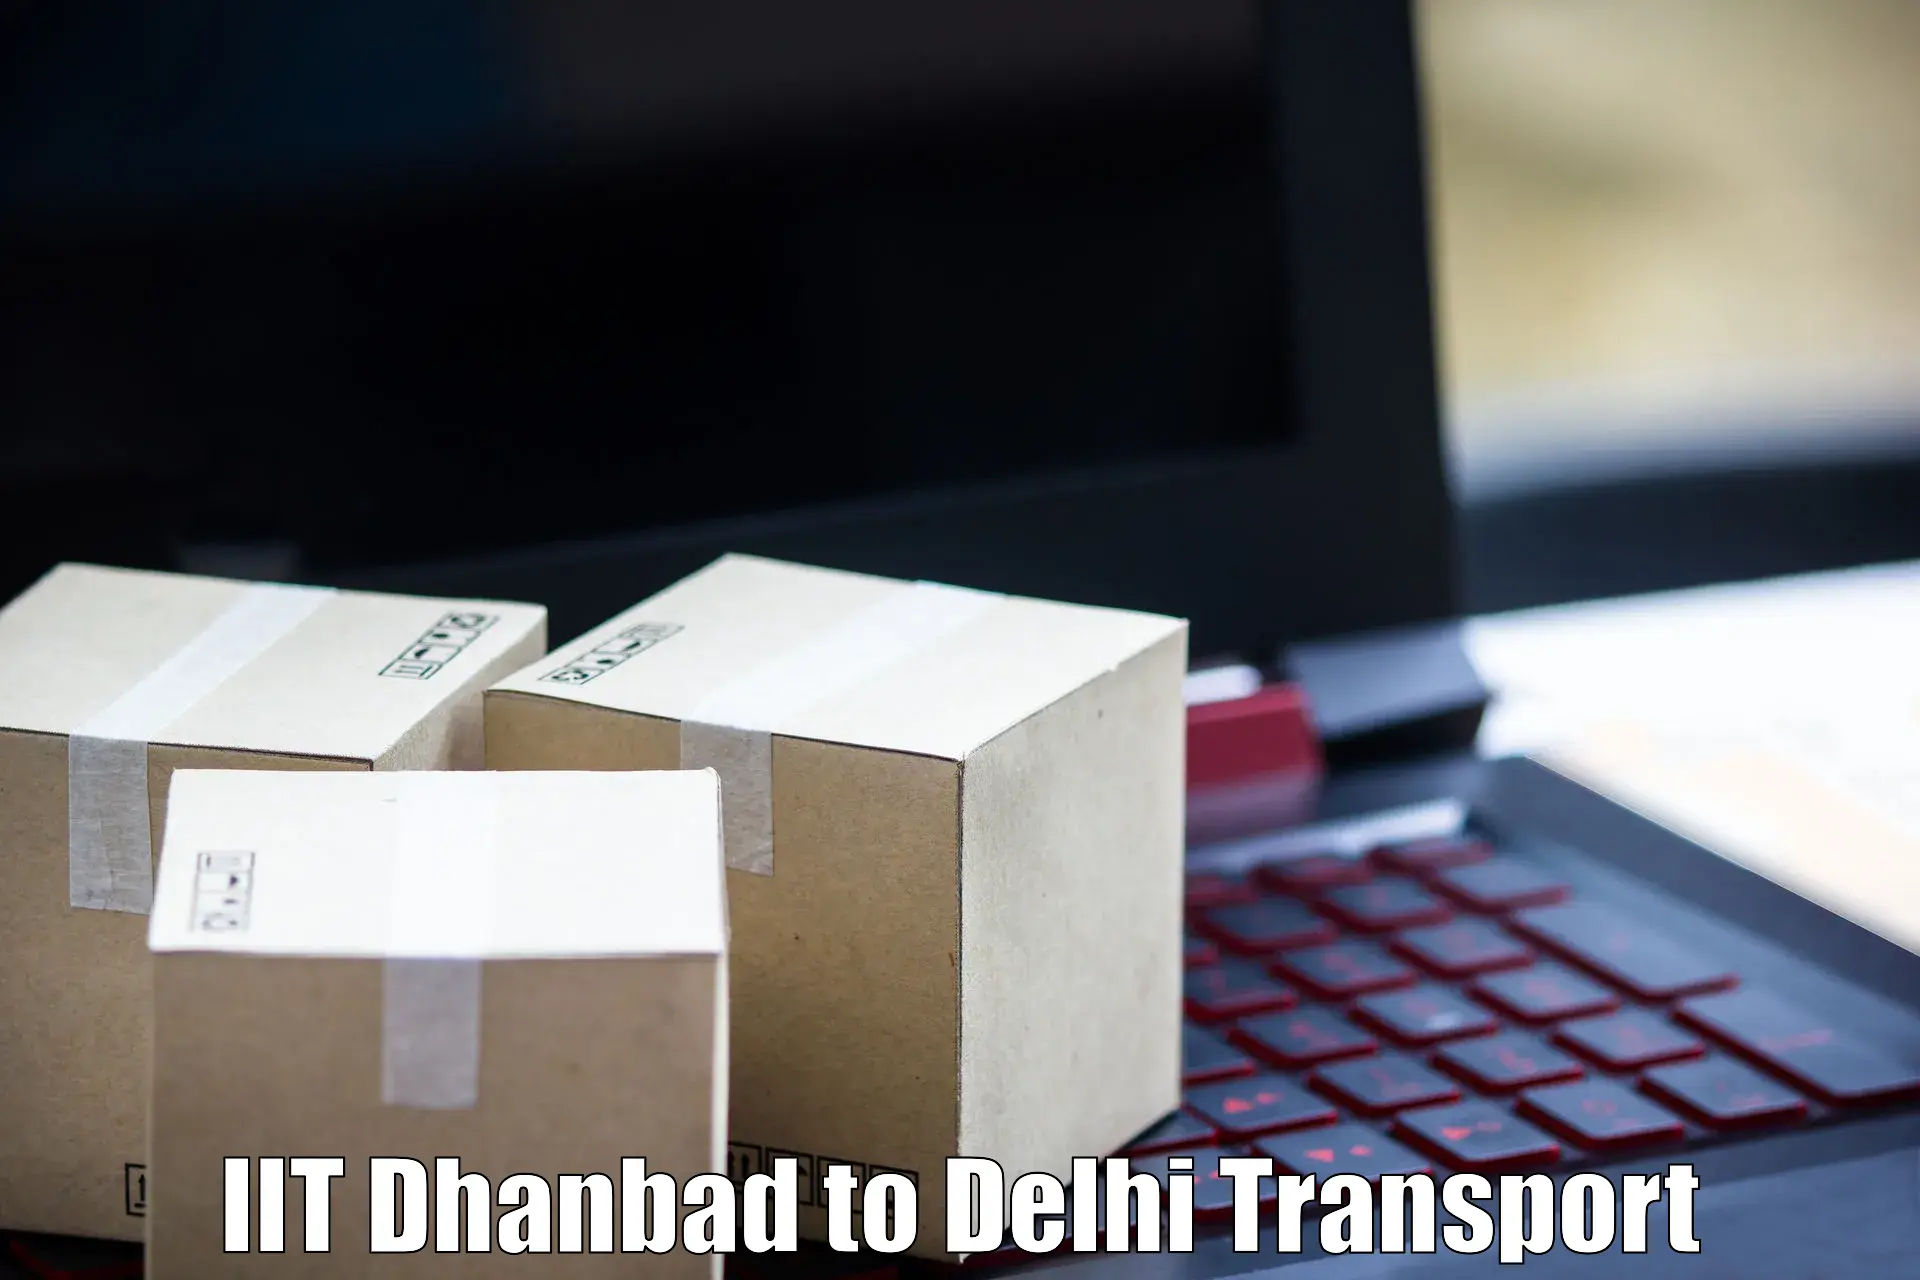 Daily transport service in IIT Dhanbad to Burari